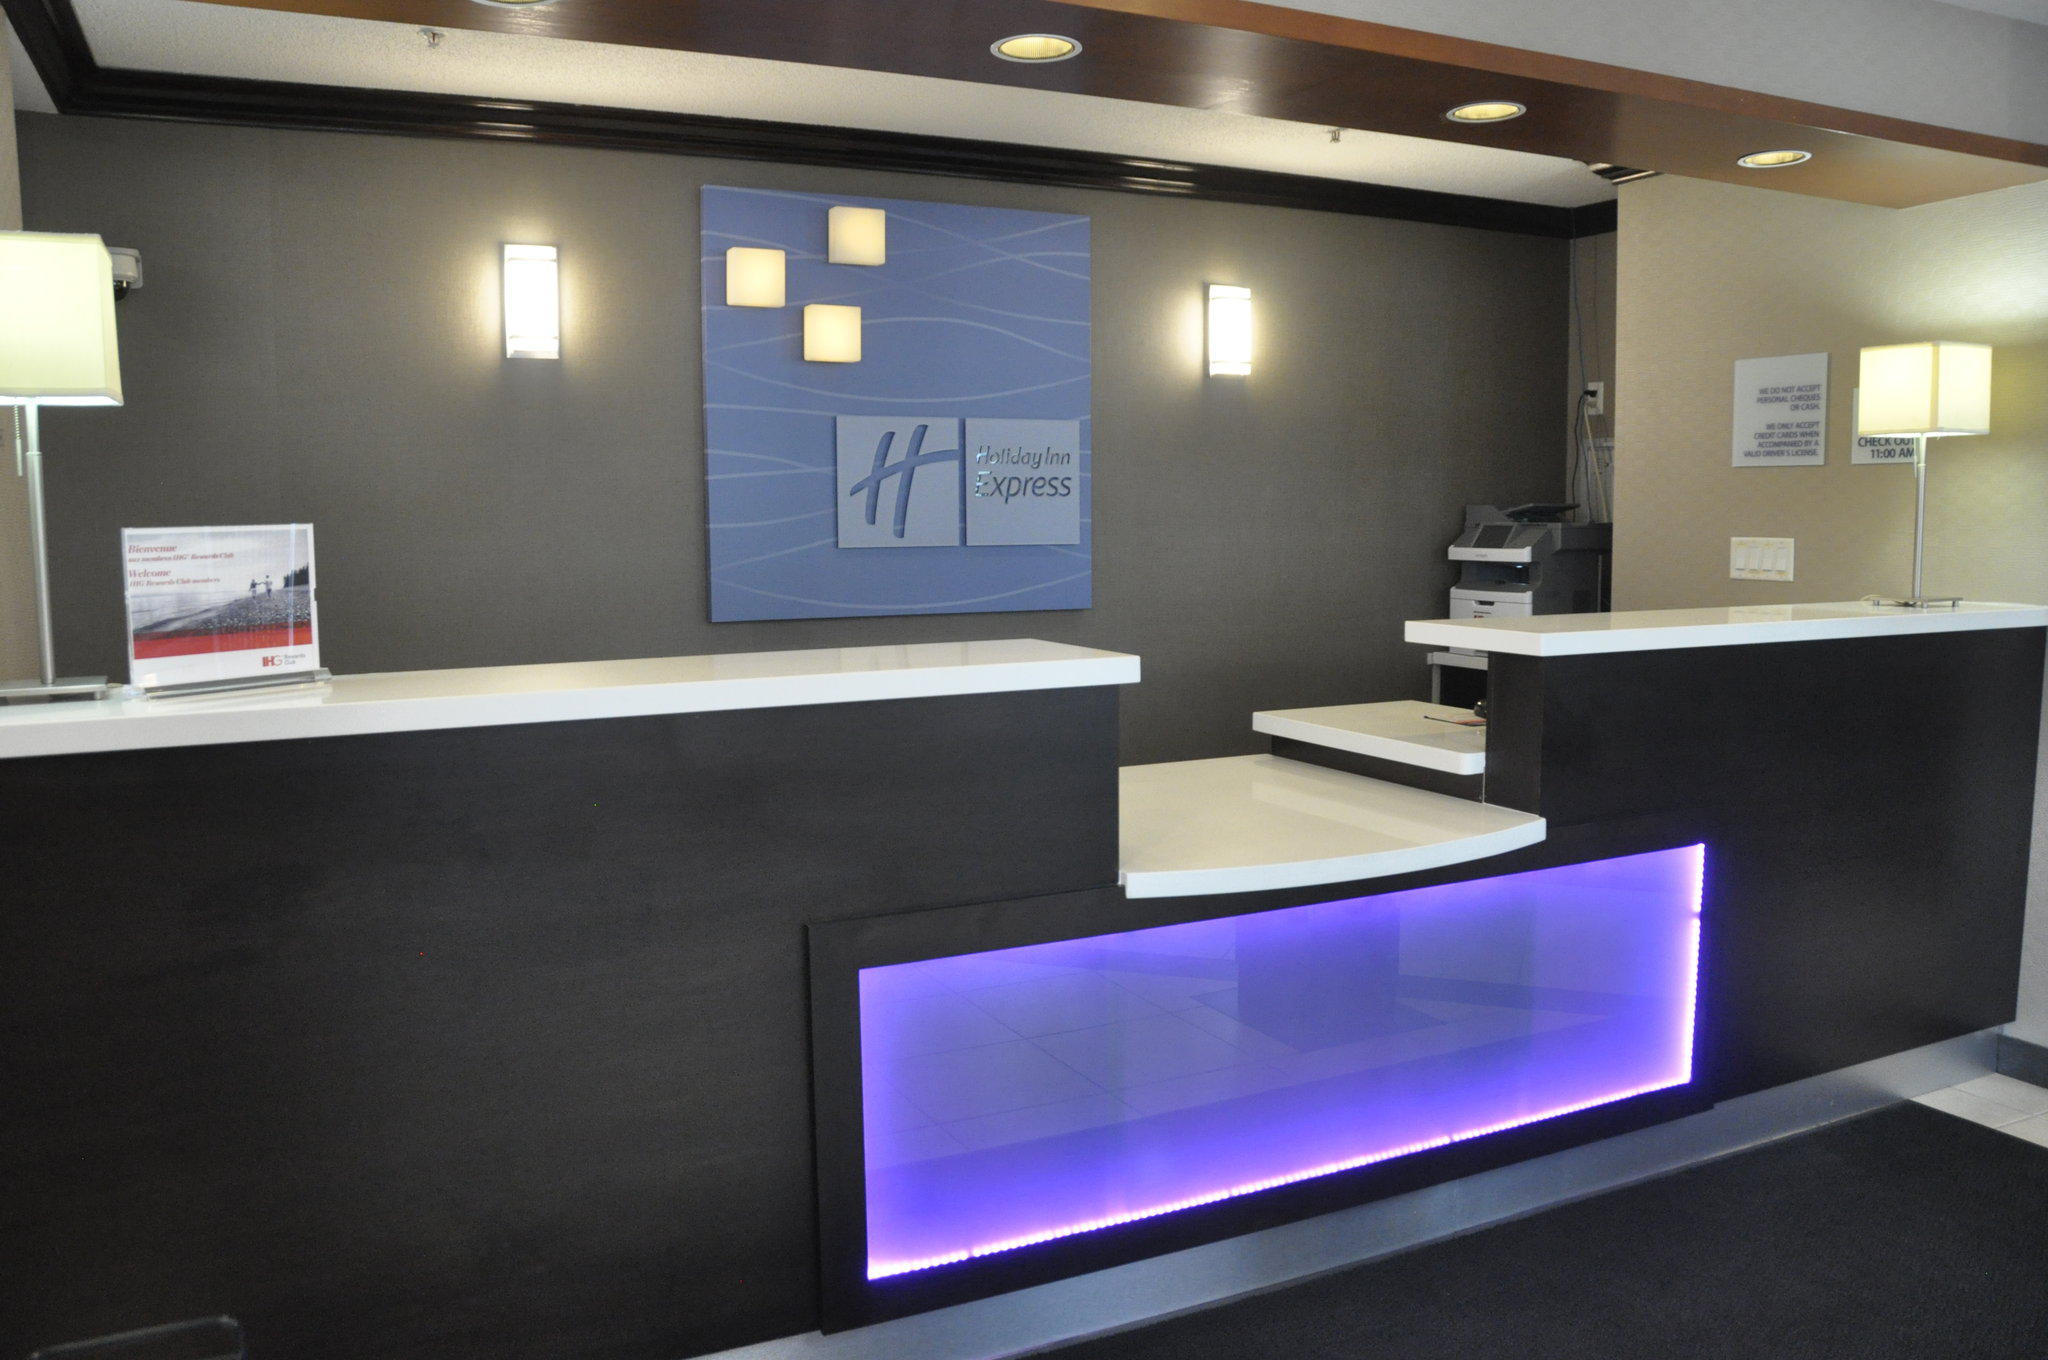 Holiday Inn Express & Suites Barrie, an IHG Hotel in Barrie